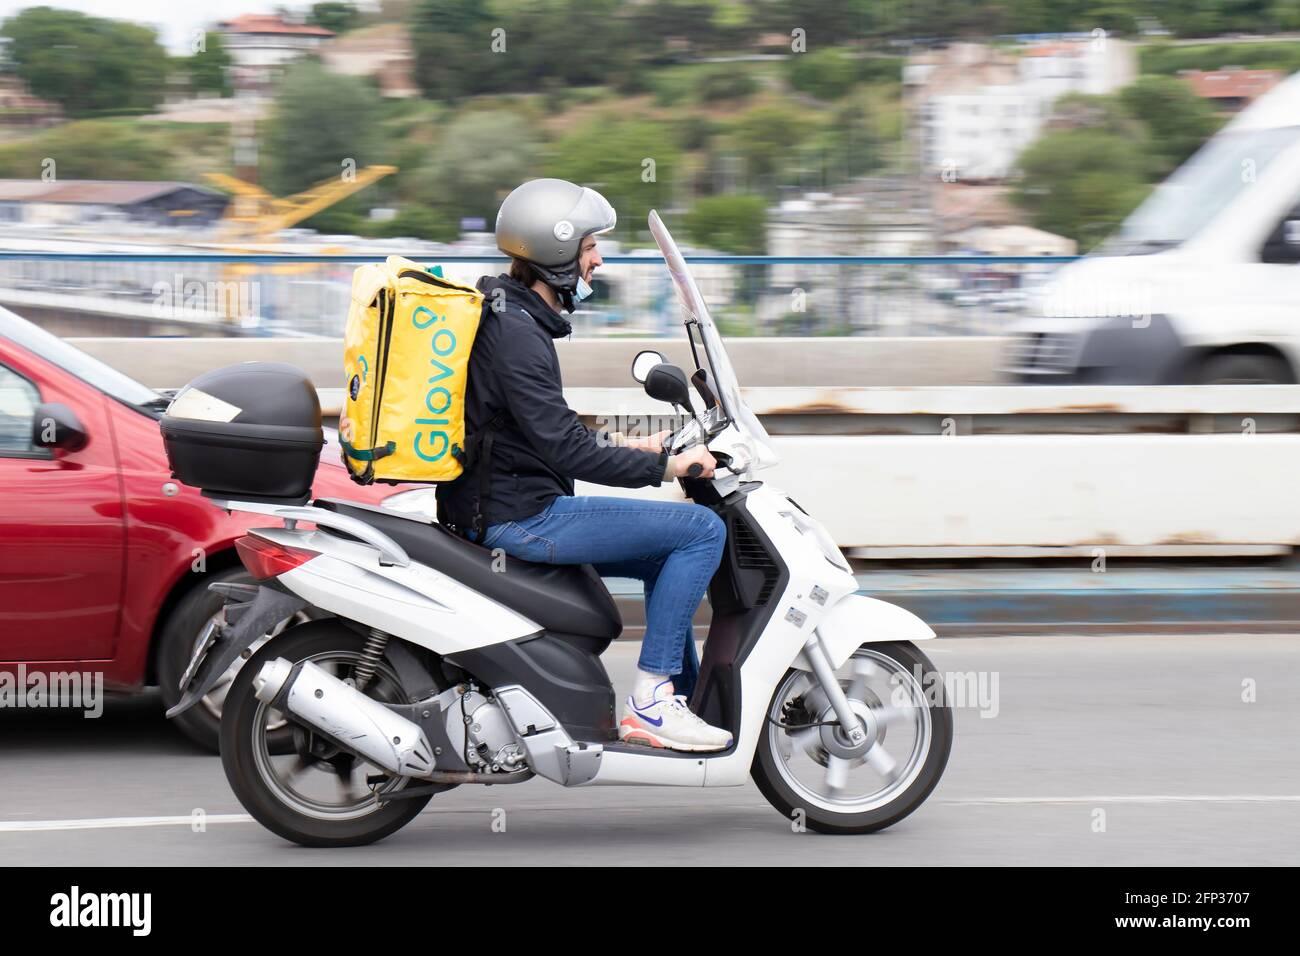 Belgrade, Serbia - May 13, 2021: Courier working for Glovo food delivery service riding a scooter on city highway over the bridge Stock Photo